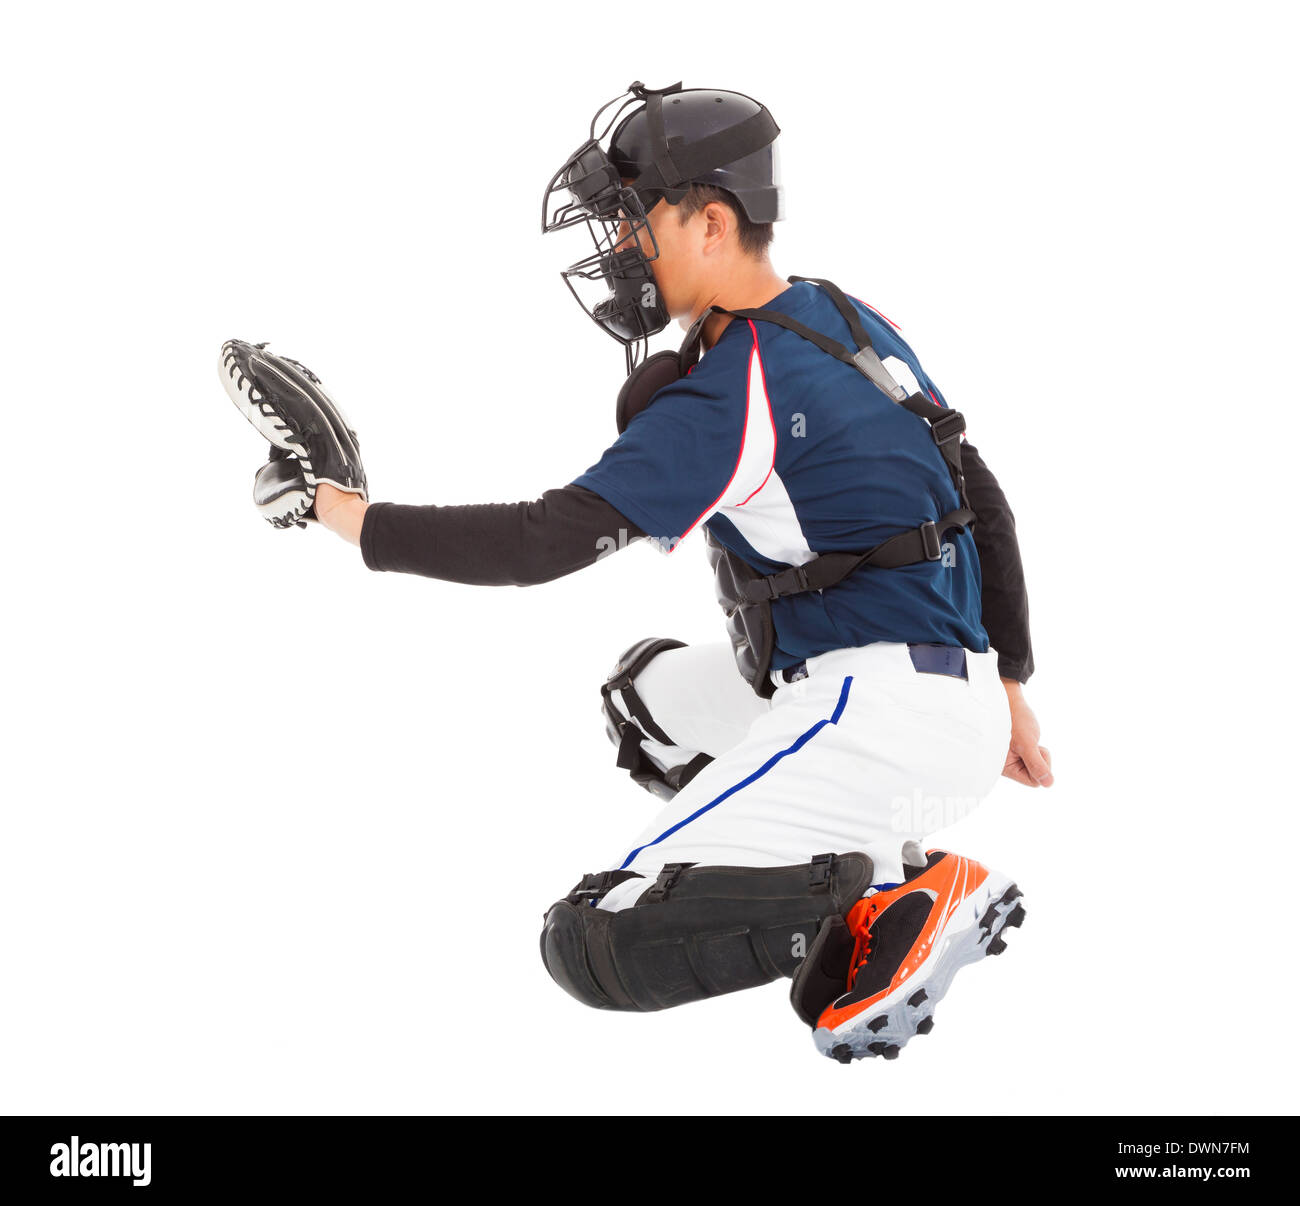 Baseball Player, Catcher,  kneeling gesture  to catching ball. sport concept Stock Photo